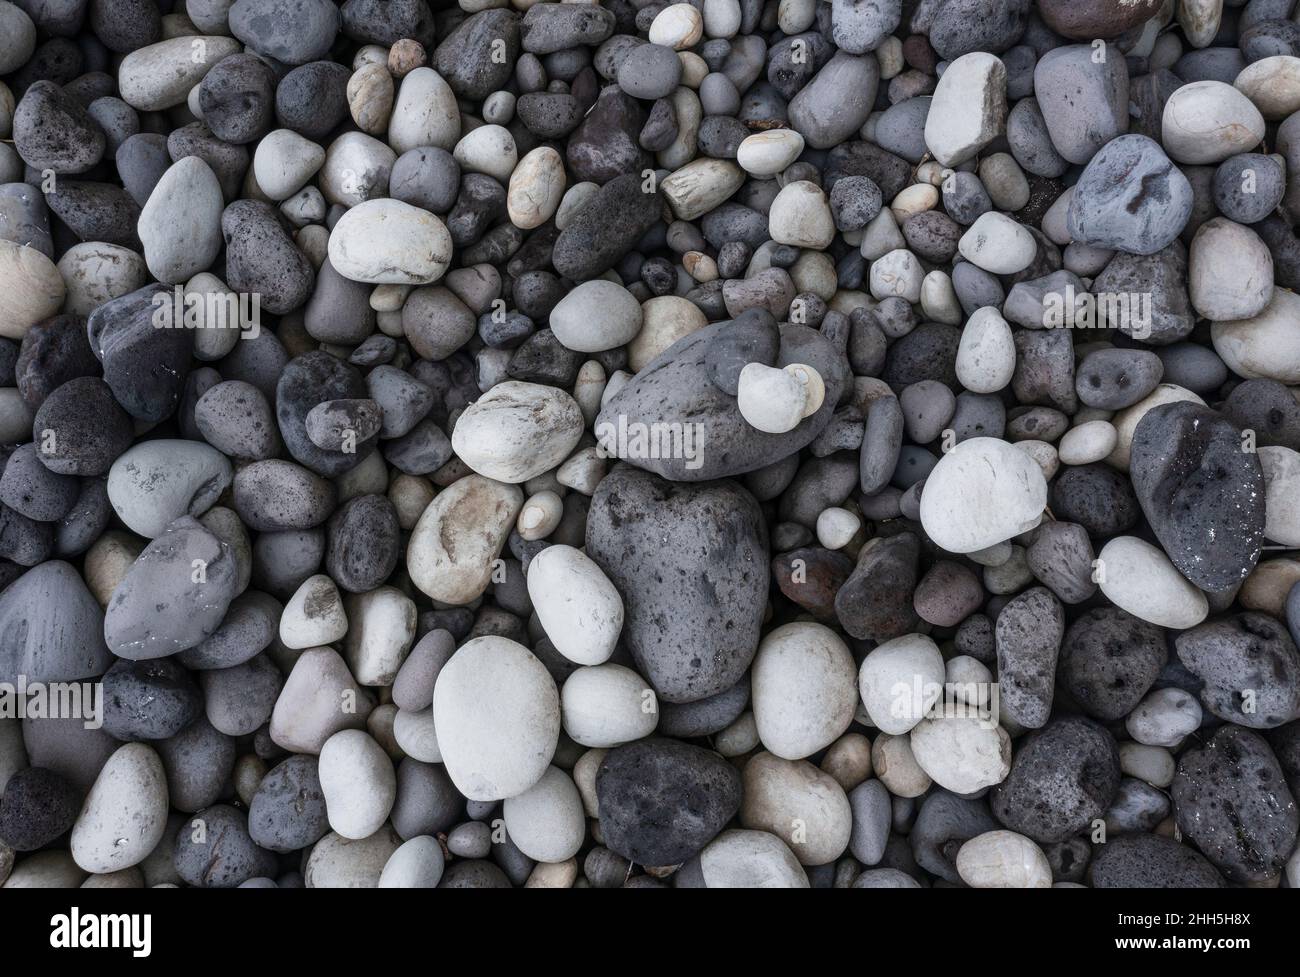 Gray and white pebbles at beach Stock Photo